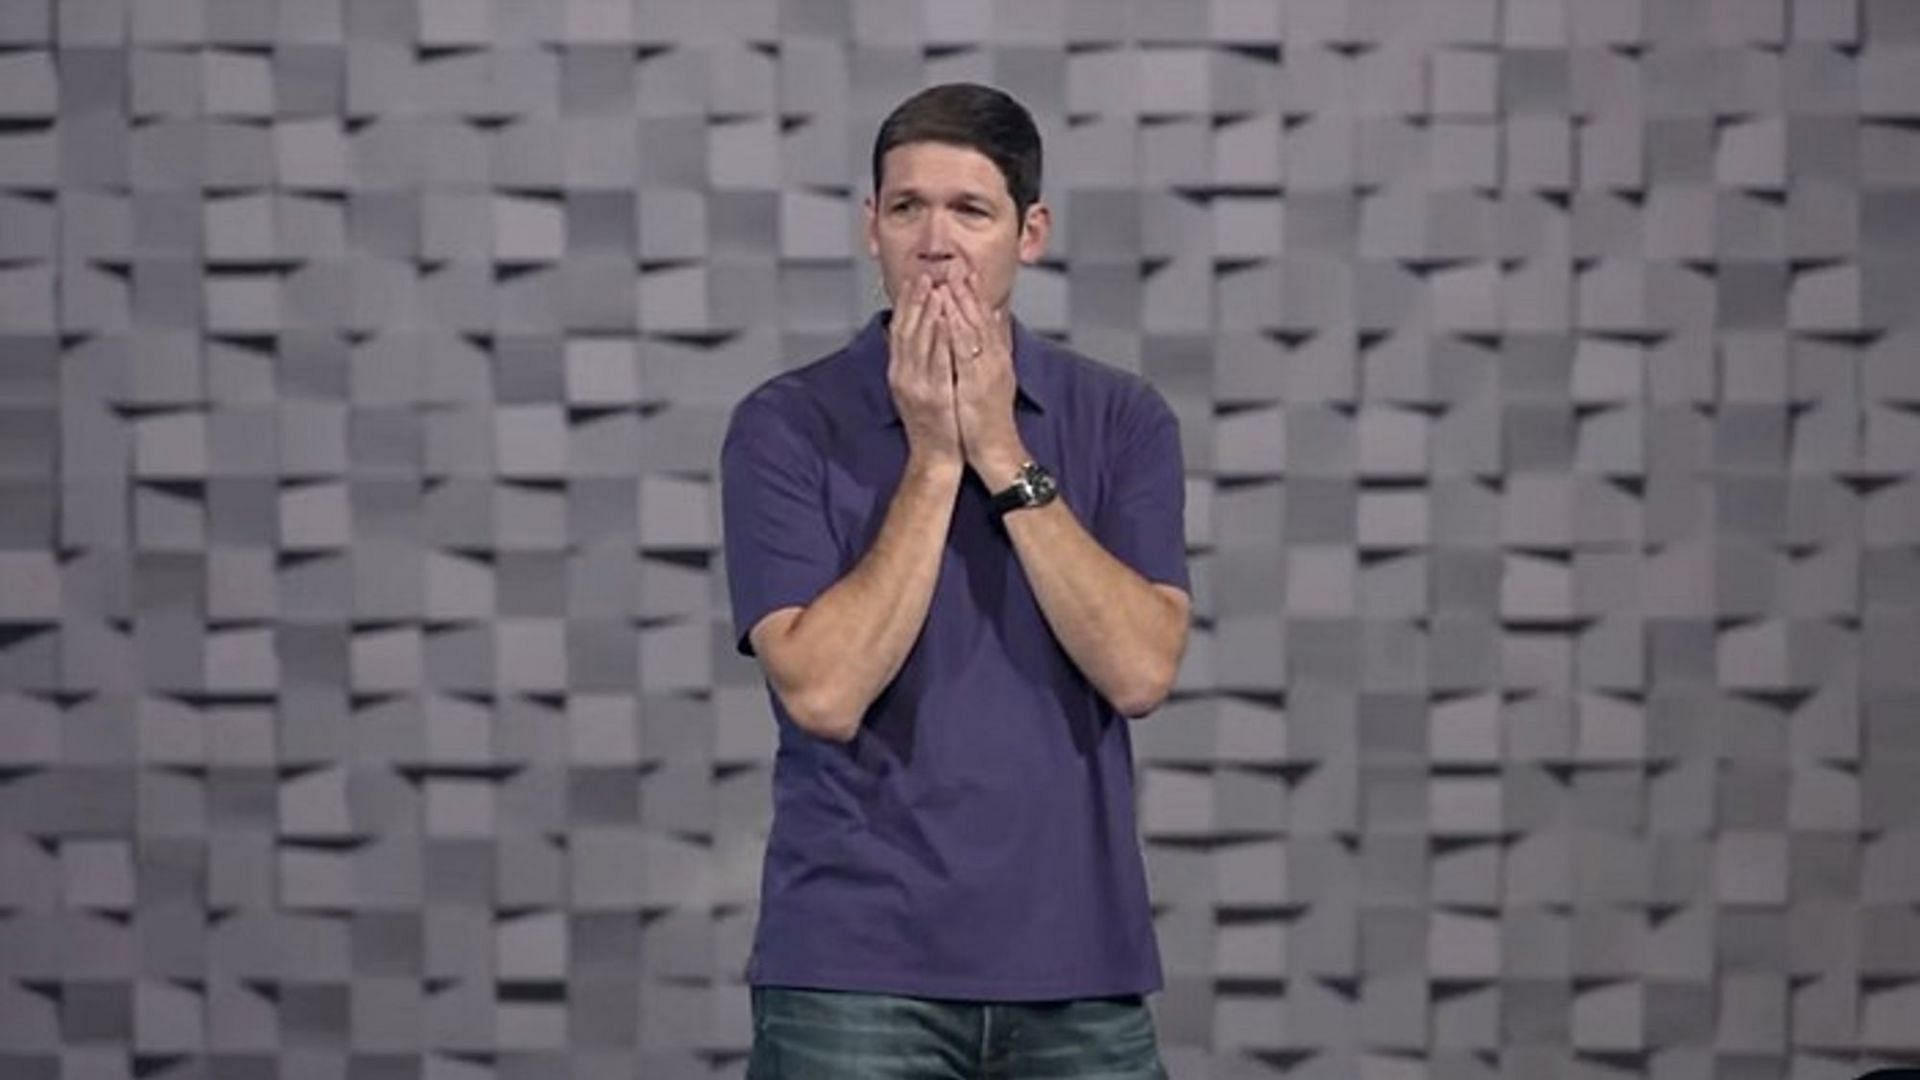 The Village Church pastor steps aside following DM controversy (Image via YouTube)